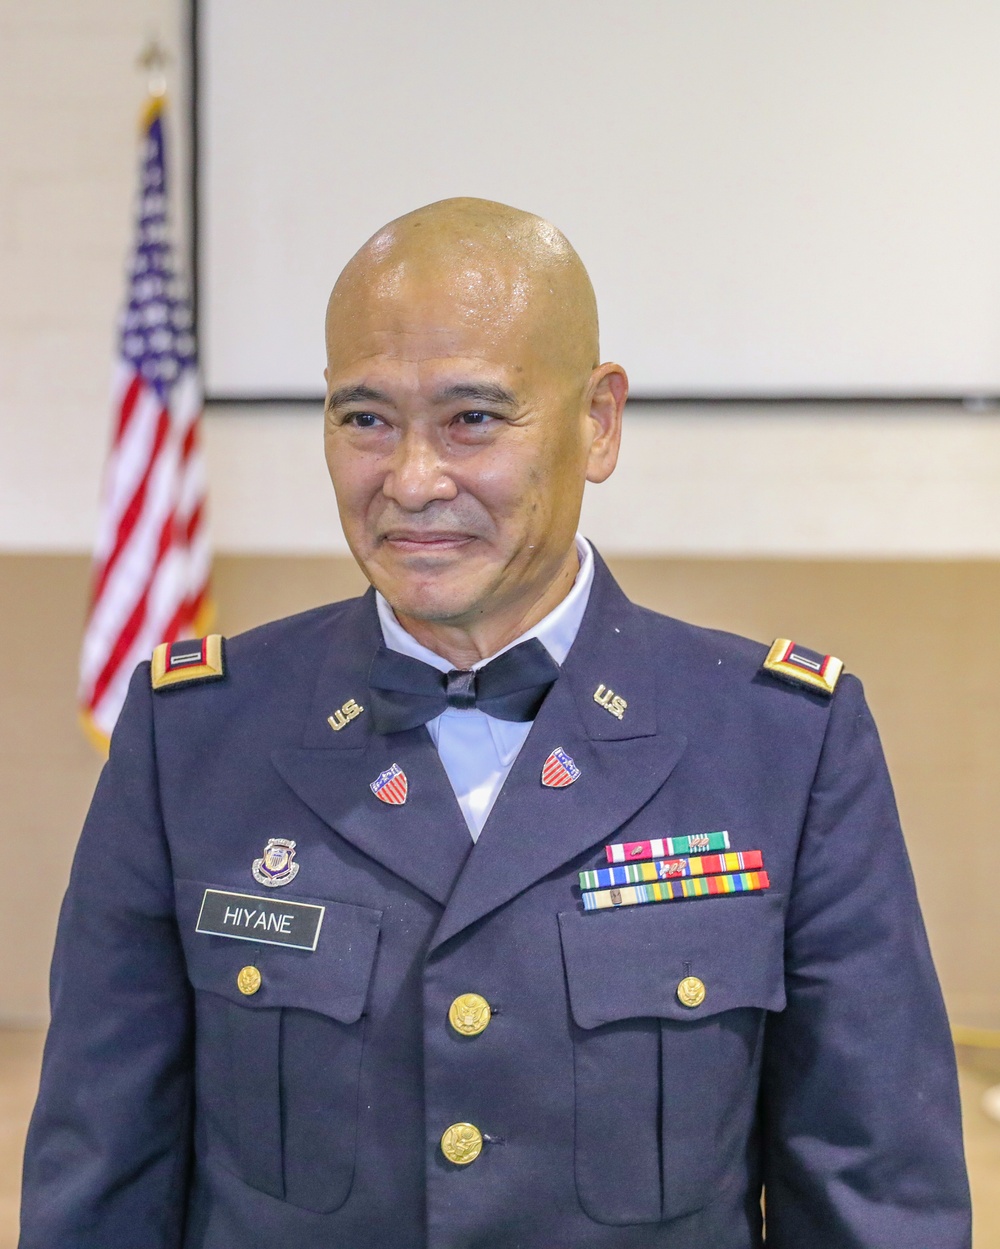 Hawaii Army National Guard Chief Warrant Officer 5 Curtis Hiyane Promotion